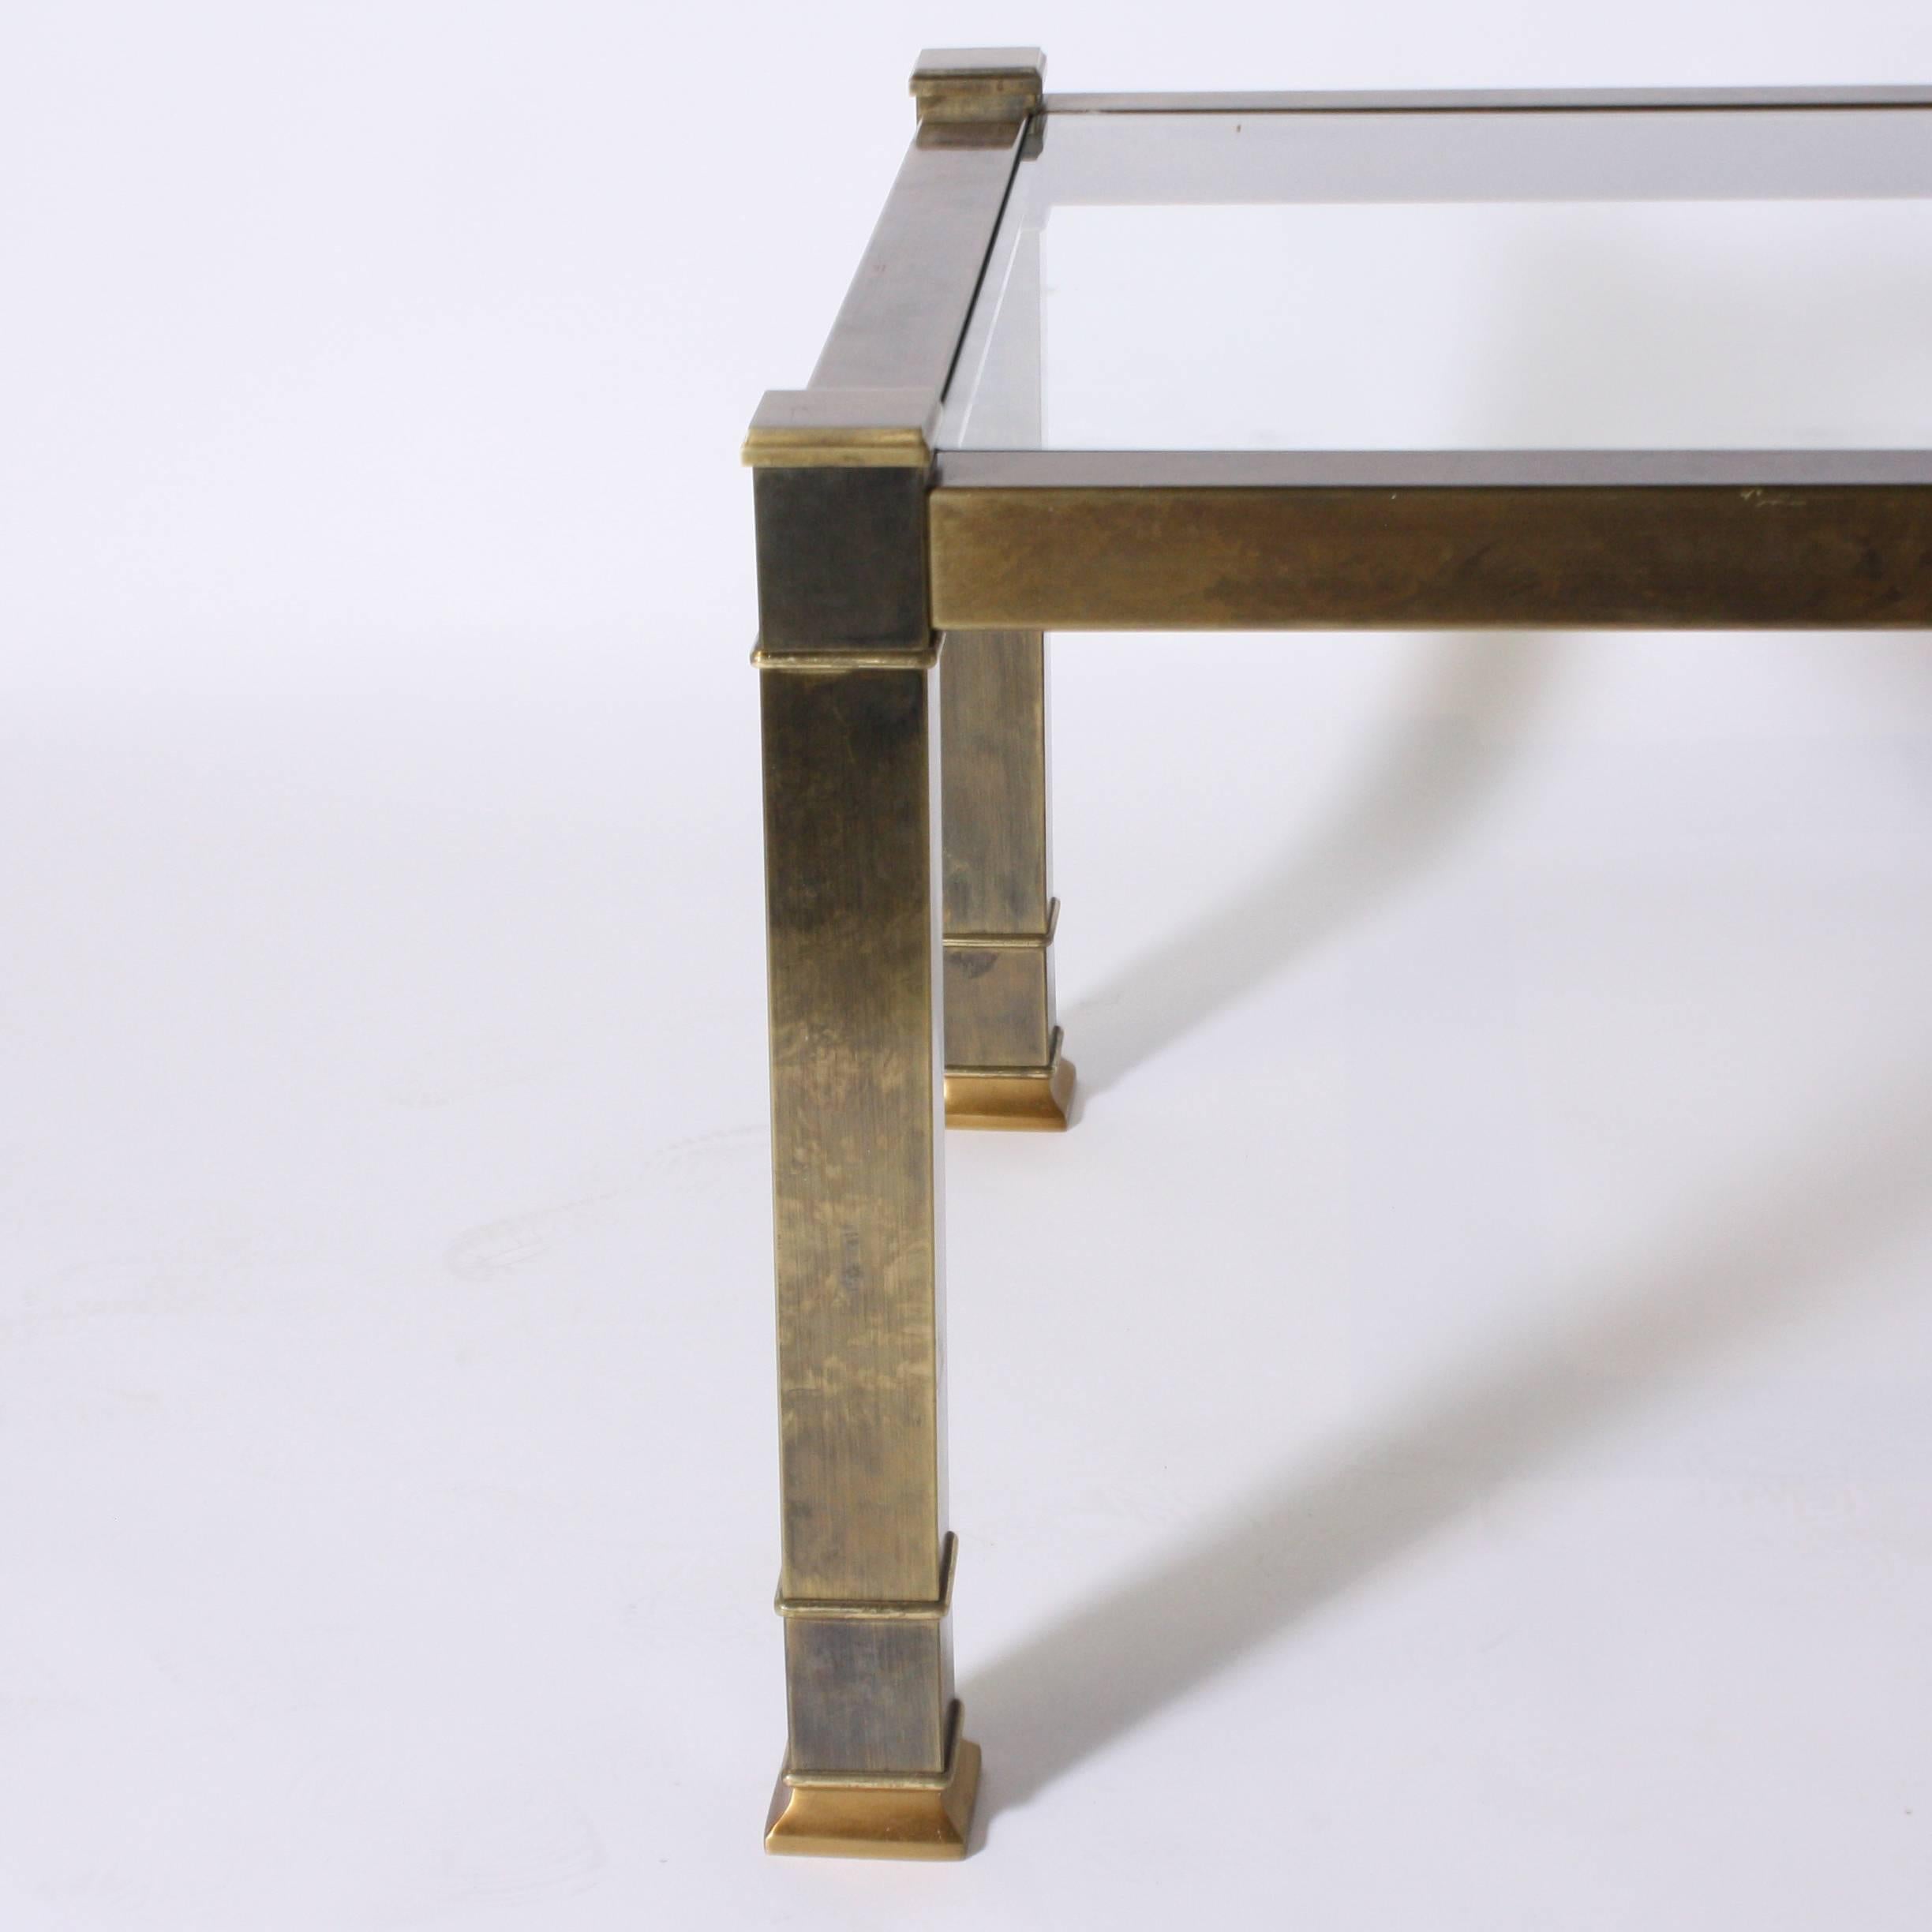 Pair of brass mastercraft side tables with glass tops.